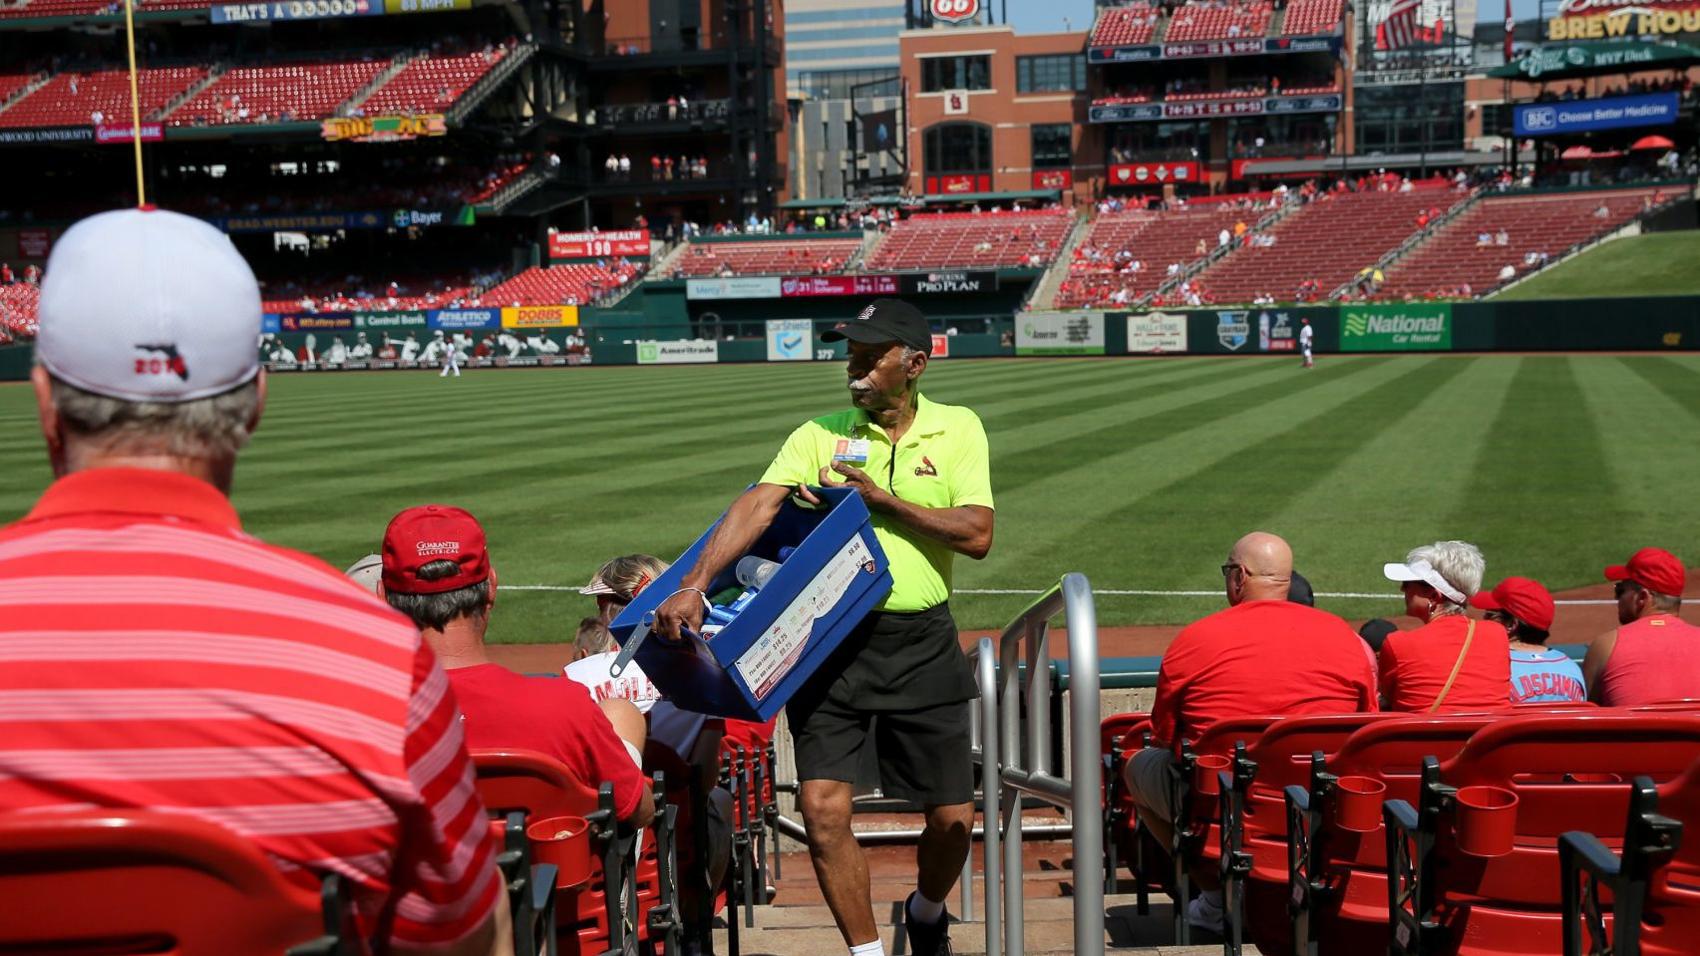 Cardinals establish $1 million fund for concession and cleanup workers, emergency crew, other game-day staff